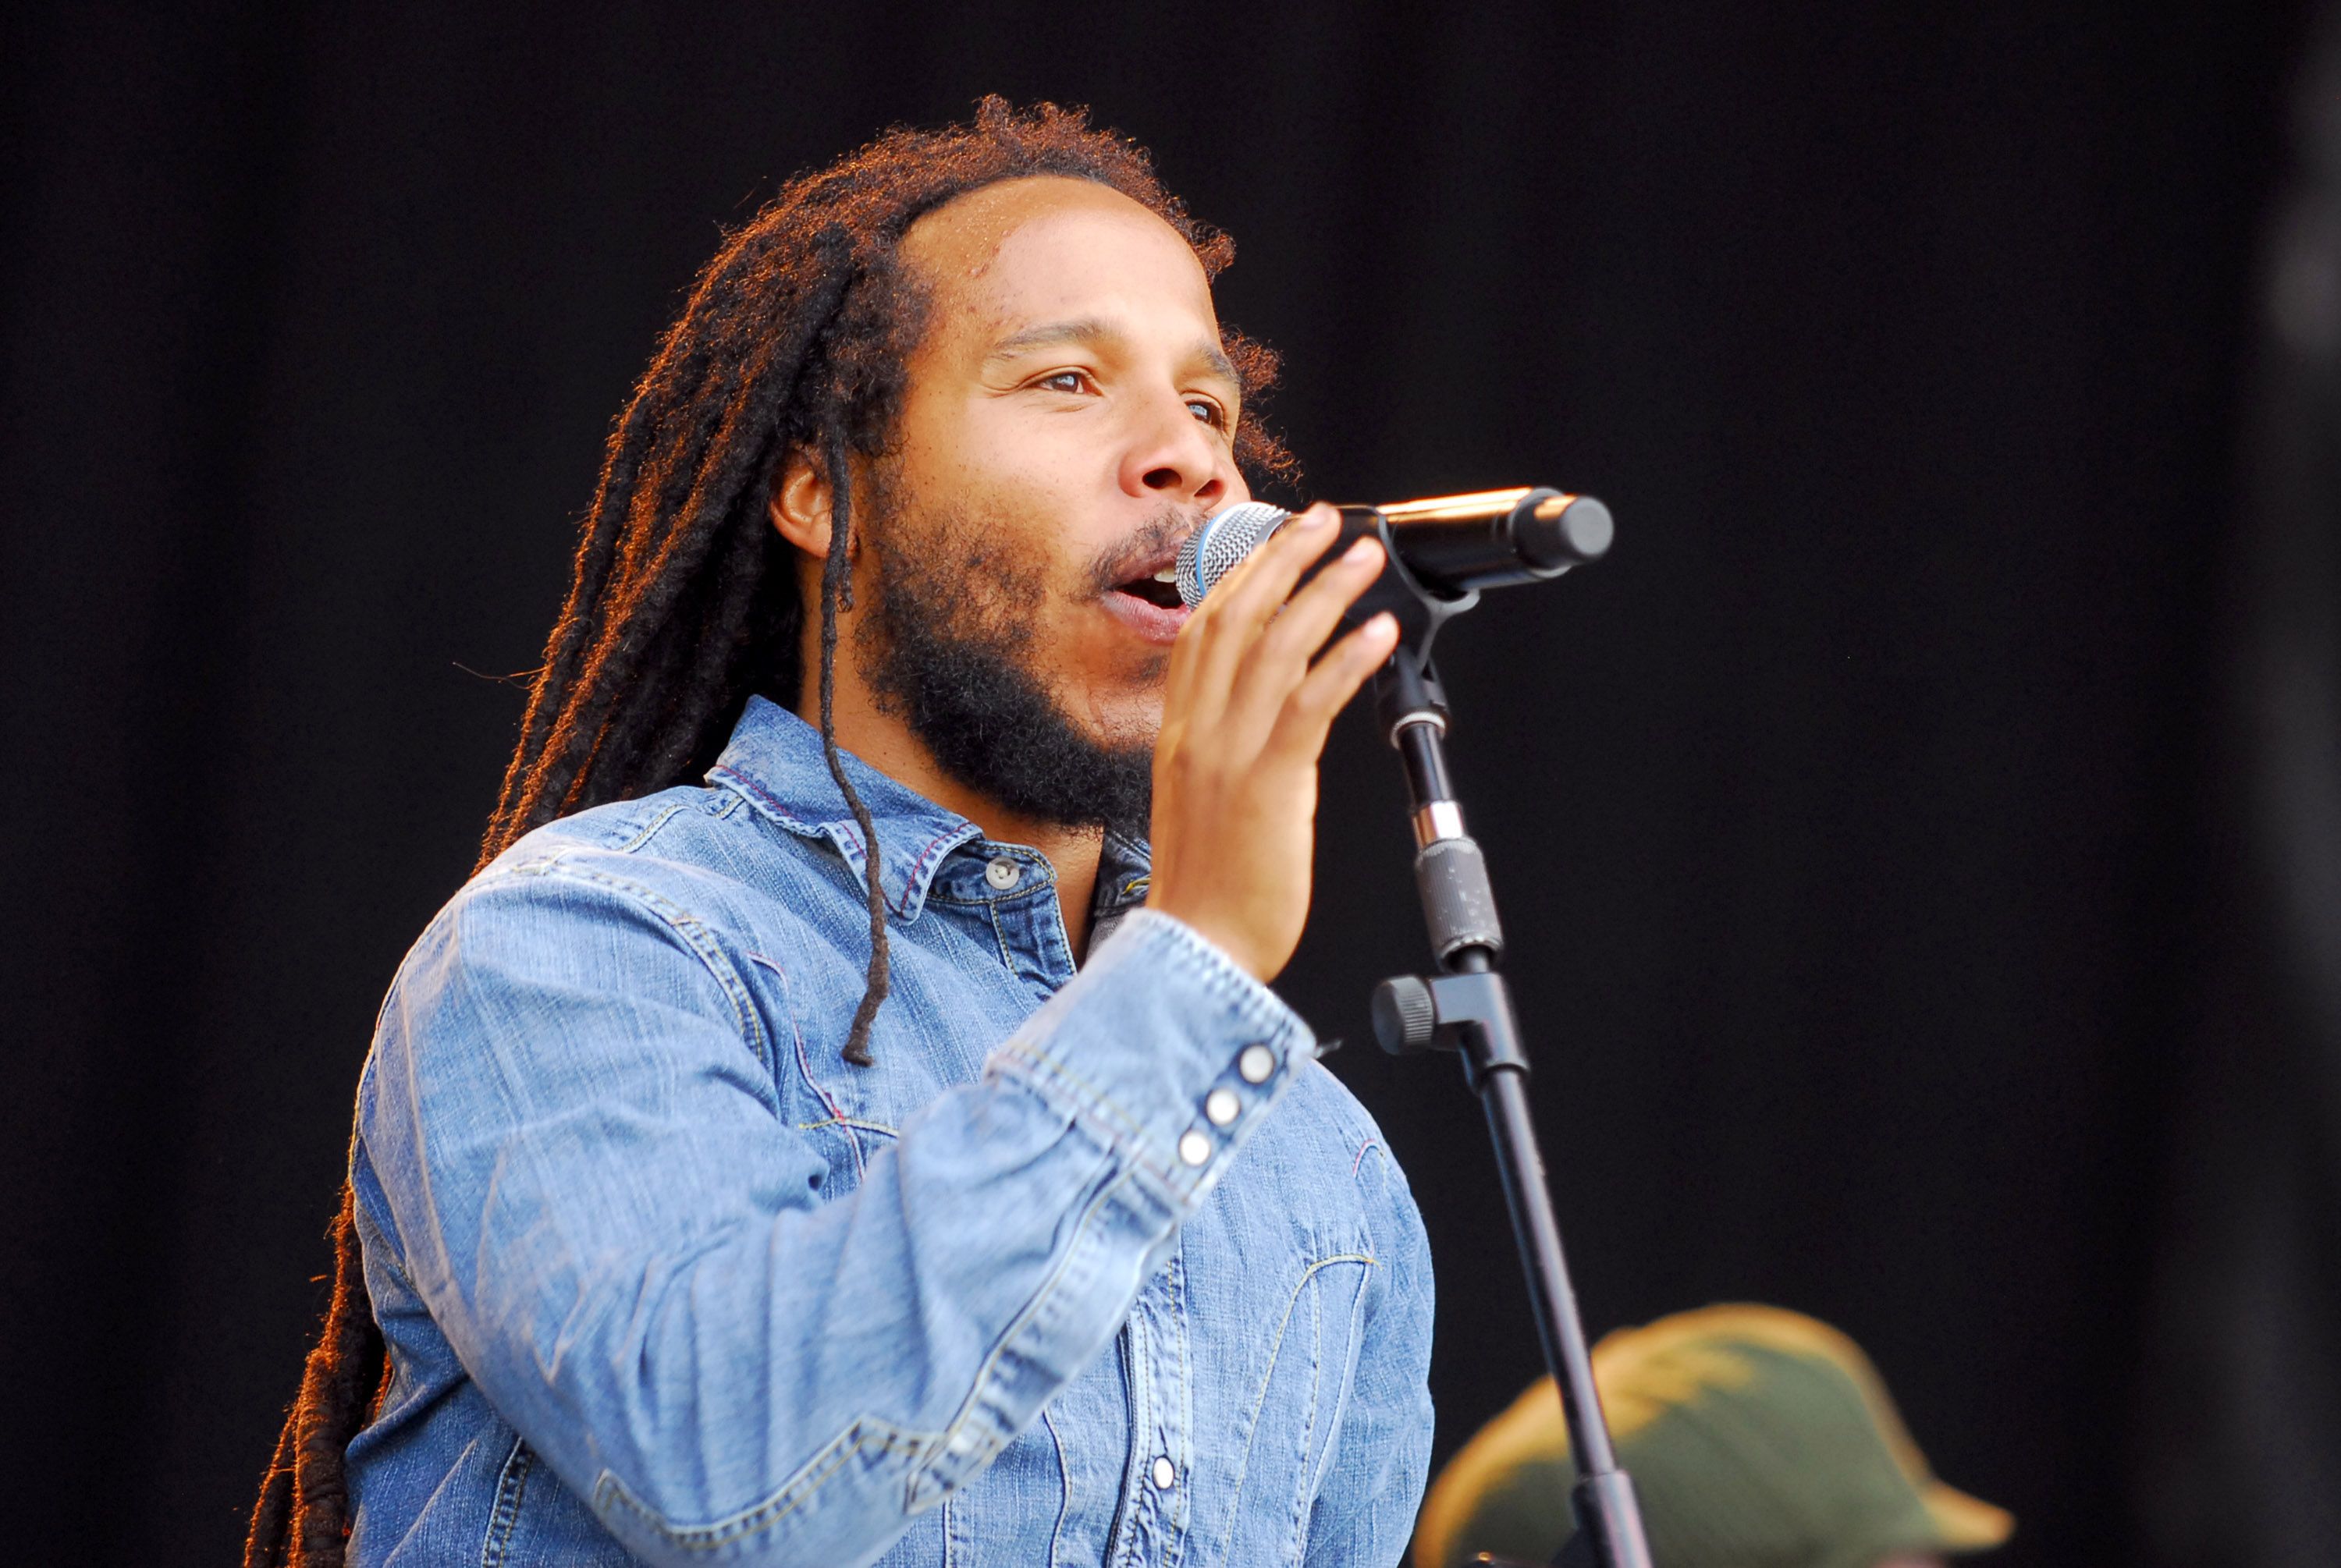 Ziggy Marley sings in Manchester, Tennessee, at the Bonnaroo Music and Arts Festival in 2007 | Photo: Getty Images